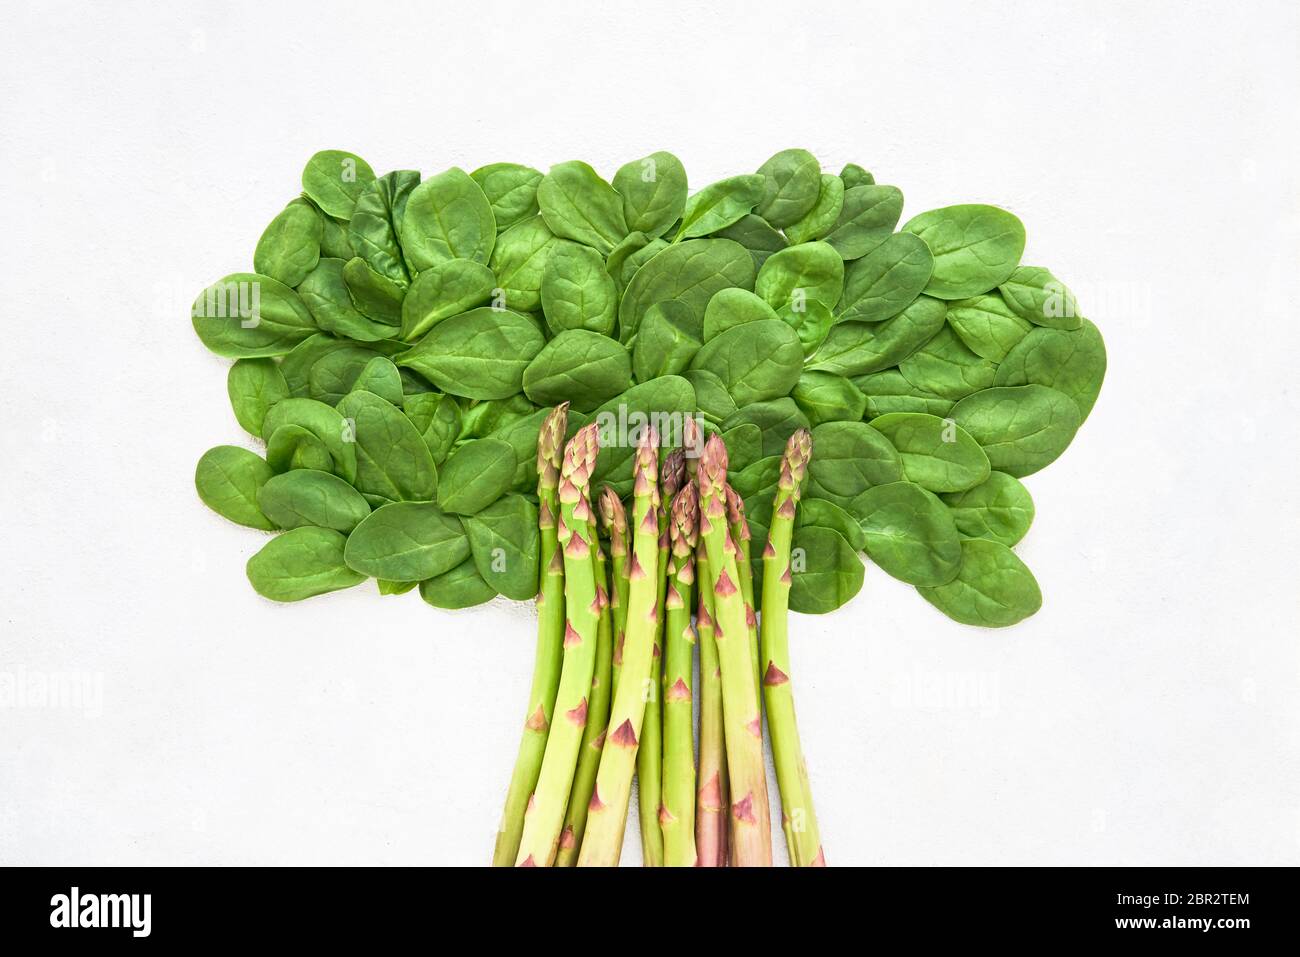 Abstract tree from green spinach leaves and asparagus. Healthy food, dietary and weight lose concept. Top view, copy space Stock Photo